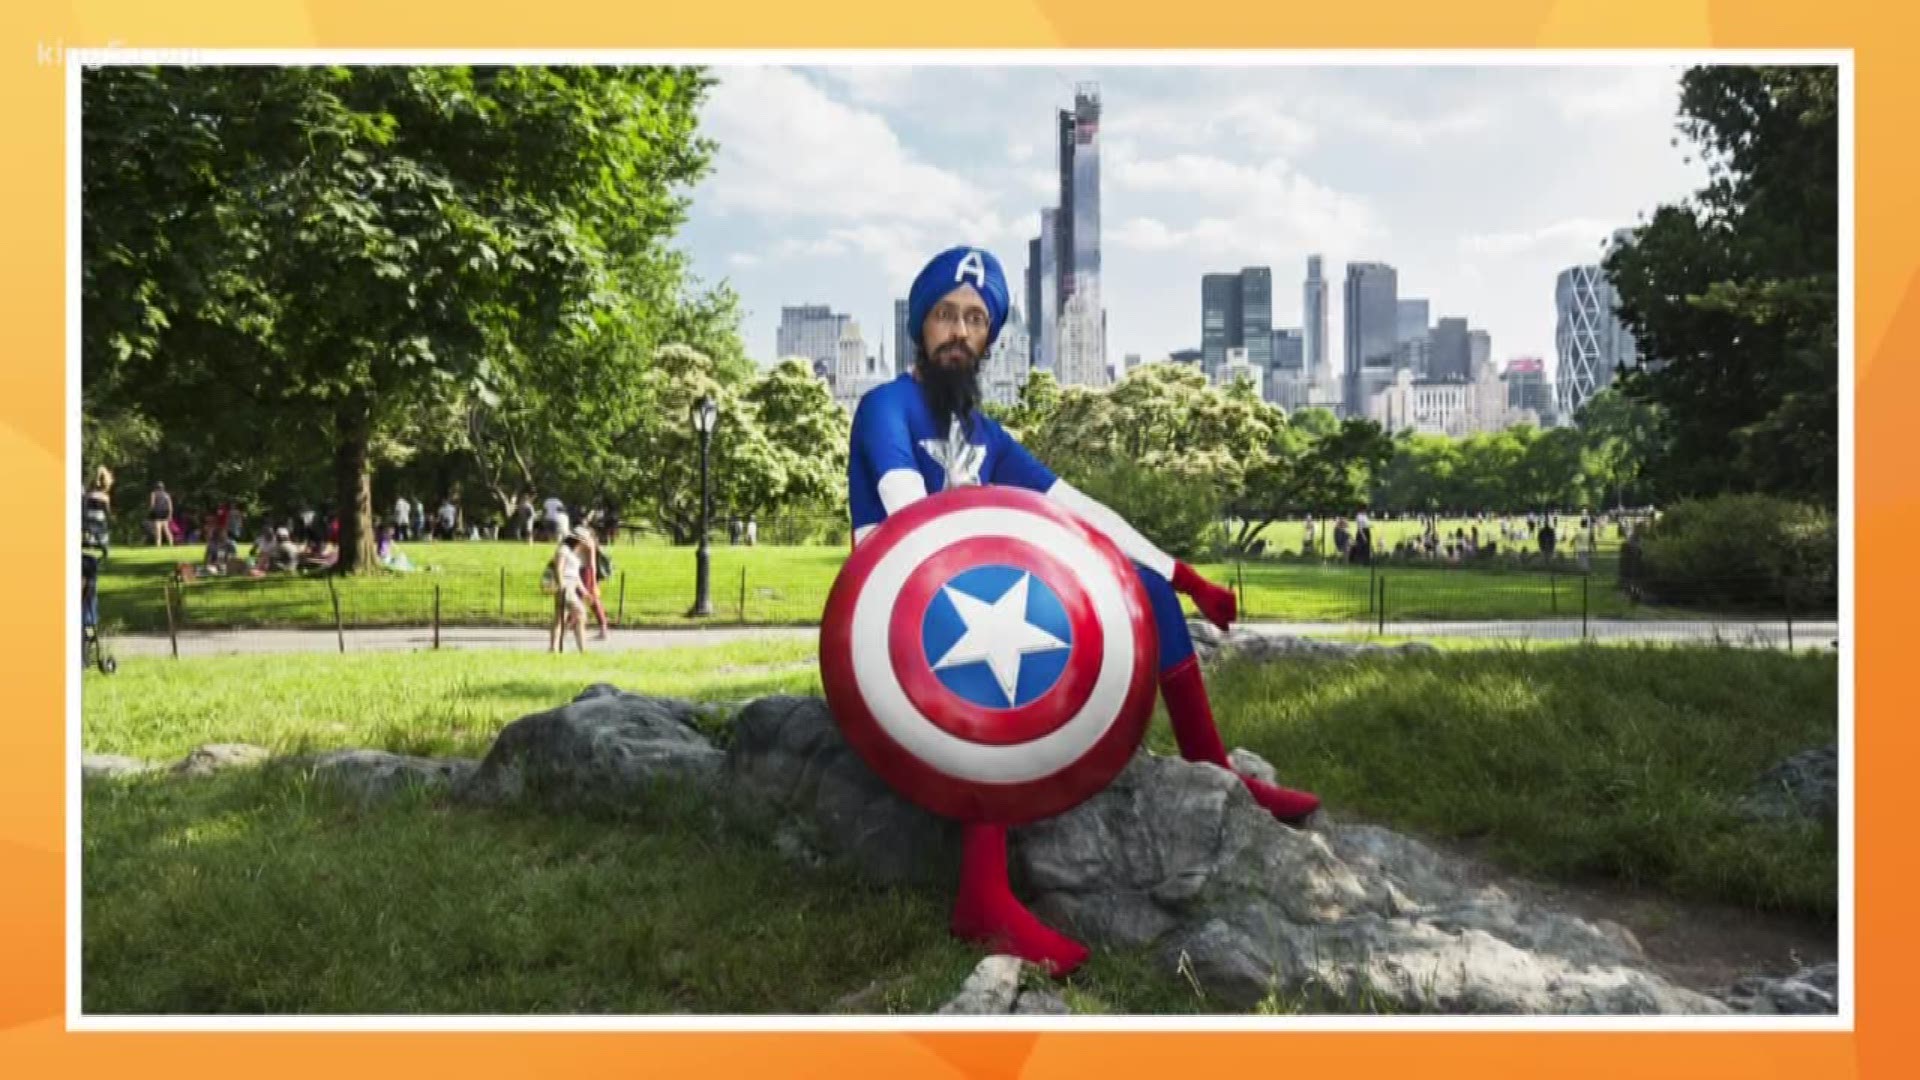 Vishavjit Singh, the "Sikh Captain America," and his illustrations went on display this month at the Wing Luke Museum.